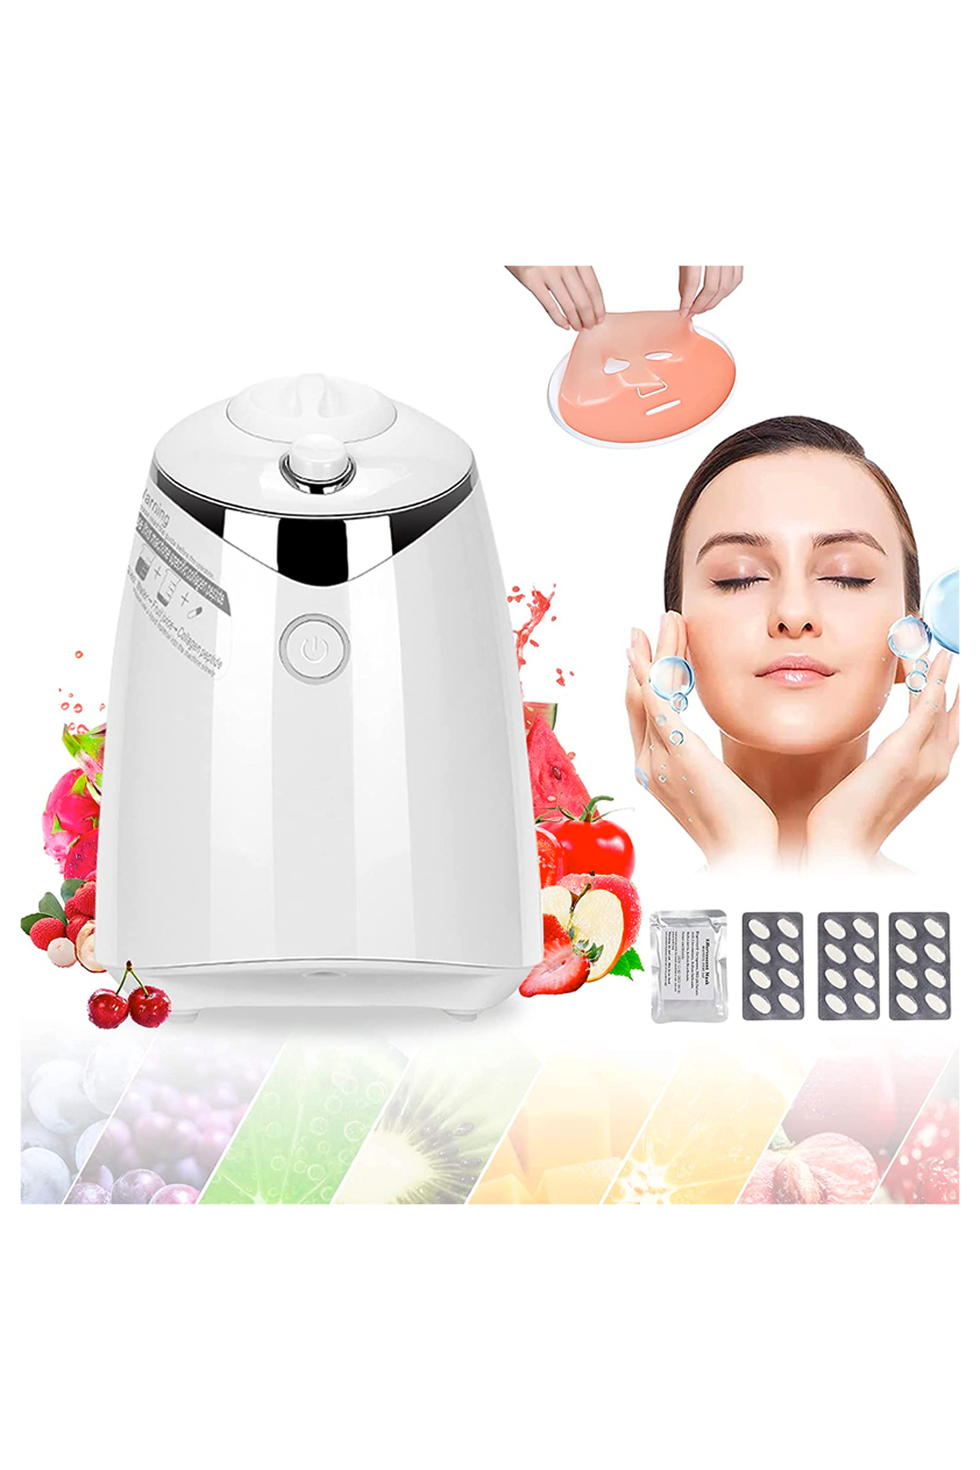 Face Mask Machines: How They Work, and if You Should Use Them